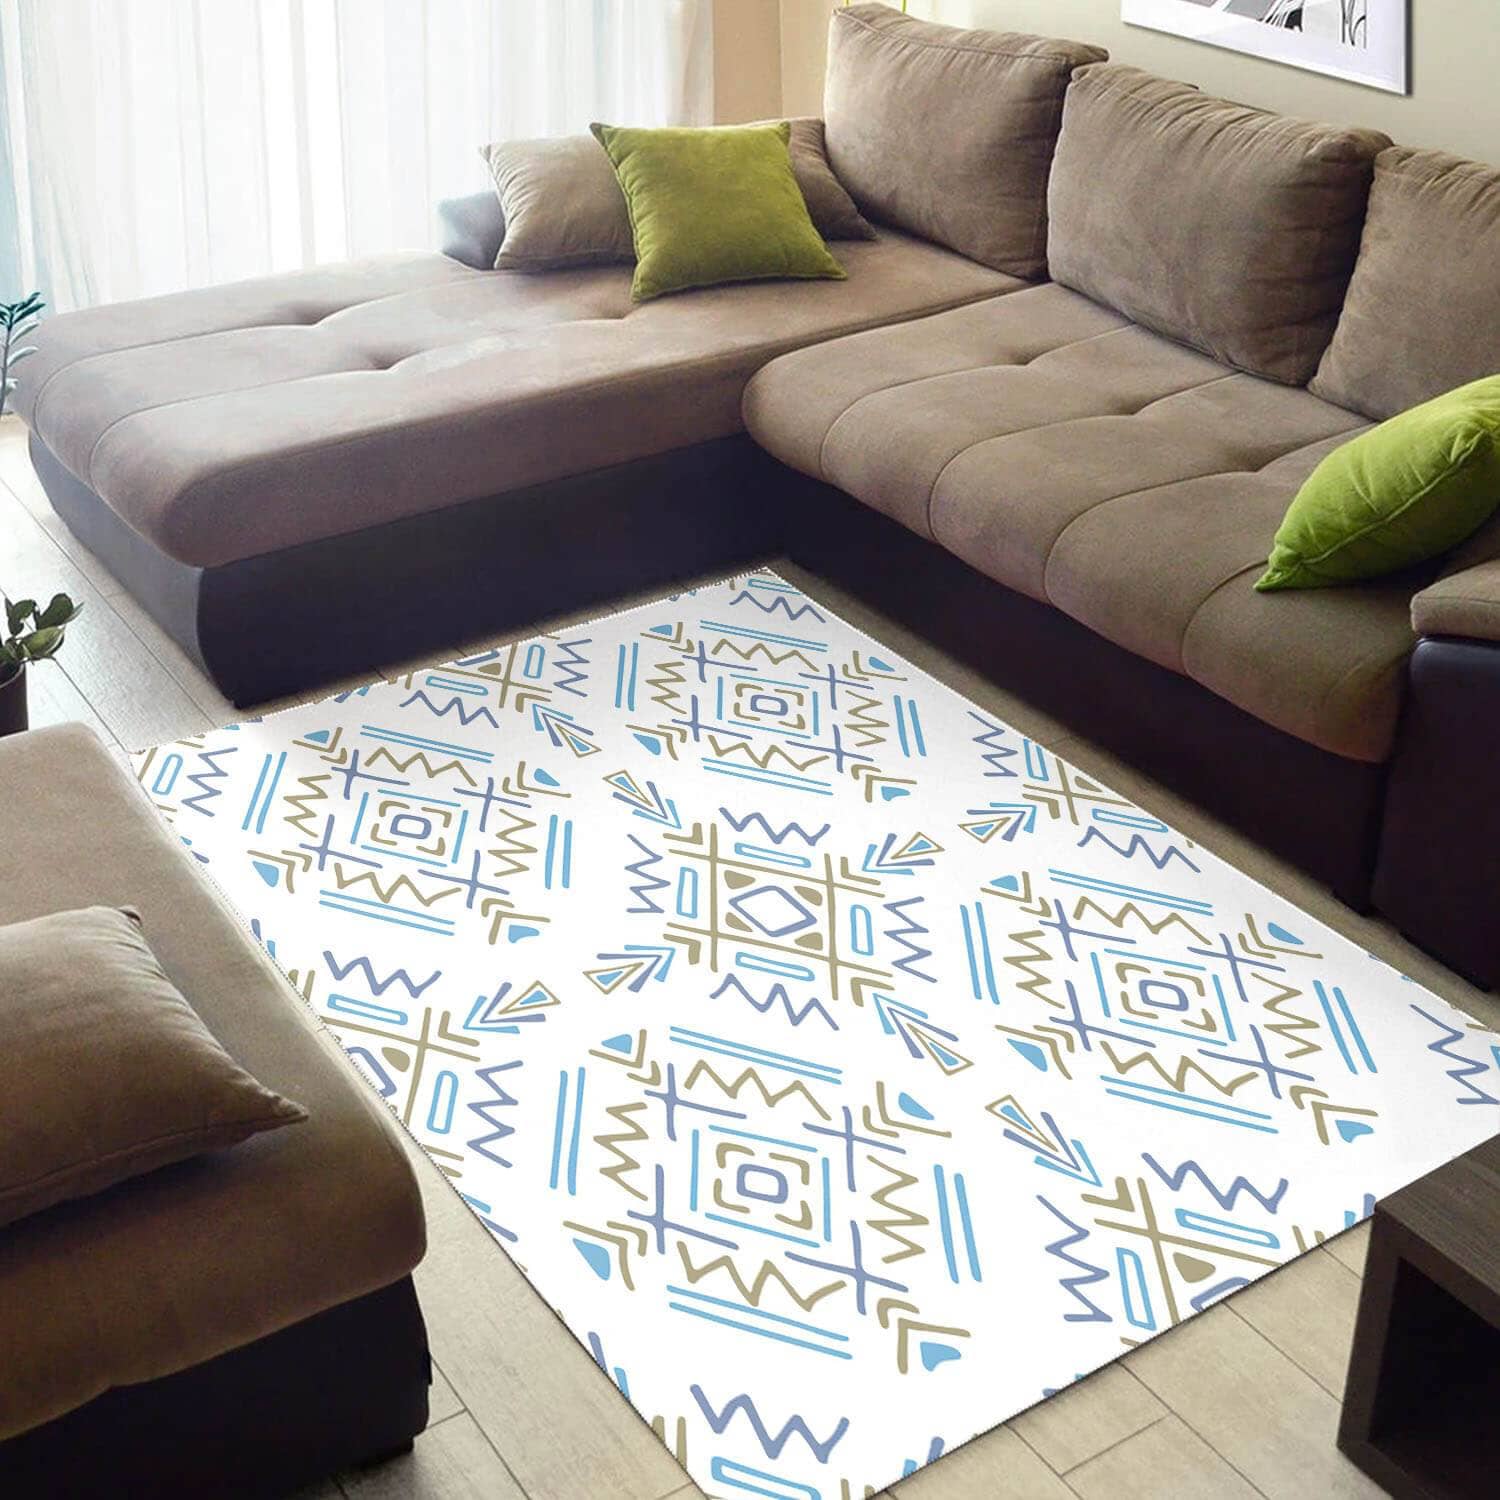 Trendy African Abstract American Black Art Ethnic Seamless Pattern Themed Inspired Home Rug